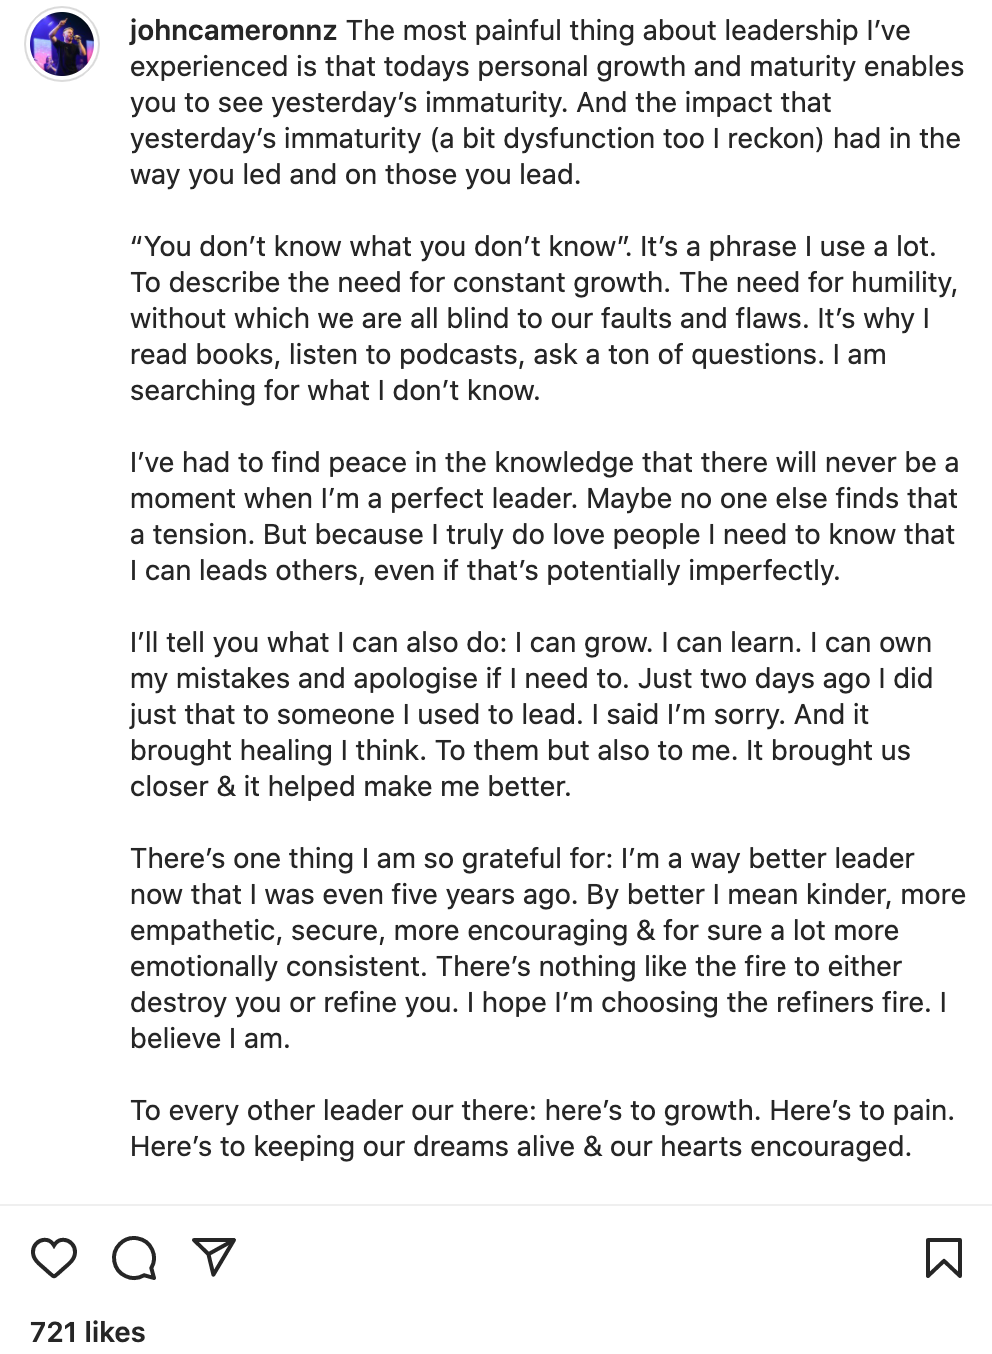 "The most painful thing about leadership I’ve experienced is that todays personal growth and maturity enables you to see yesterday’s immaturity. And the impact that yesterday’s immaturity (a bit dysfunction too I reckon) had in the way you led and on those you lead.  “You don’t know what you don’t know”. It’s a phrase I use a lot. To describe the need for constant growth. The need for humility, without which we are all blind to our faults and flaws. It’s why I read books, listen to podcasts, ask a ton of questions. I am searching for what I don’t know.  I’ve had to find peace in the knowledge that there will never be a moment when I’m a perfect leader. Maybe no one else finds that a tension. But because I truly do love people I need to know that I can leads others, even if that’s potentially imperfectly.  I’ll tell you what I can also do: I can grow. I can learn. I can own my mistakes and apologise if I need to. Just two days ago I did just that to someone I used to lead. I said I’m sorry. And it brought healing I think. To them but also to me. It brought us closer & it helped make me better.  There’s one thing I am so grateful for: I’m a way better leader now that I was even five years ago. By better I mean kinder, more empathetic, secure, more encouraging & for sure a lot more emotionally consistent. There’s nothing like the fire to either destroy you or refine you. I hope I’m choosing the refiners fire. I believe I am.  To every other leader our there: here’s to growth. Here’s to pain. Here’s to keeping our dreams alive & our hearts encouraged.  Much love, John"